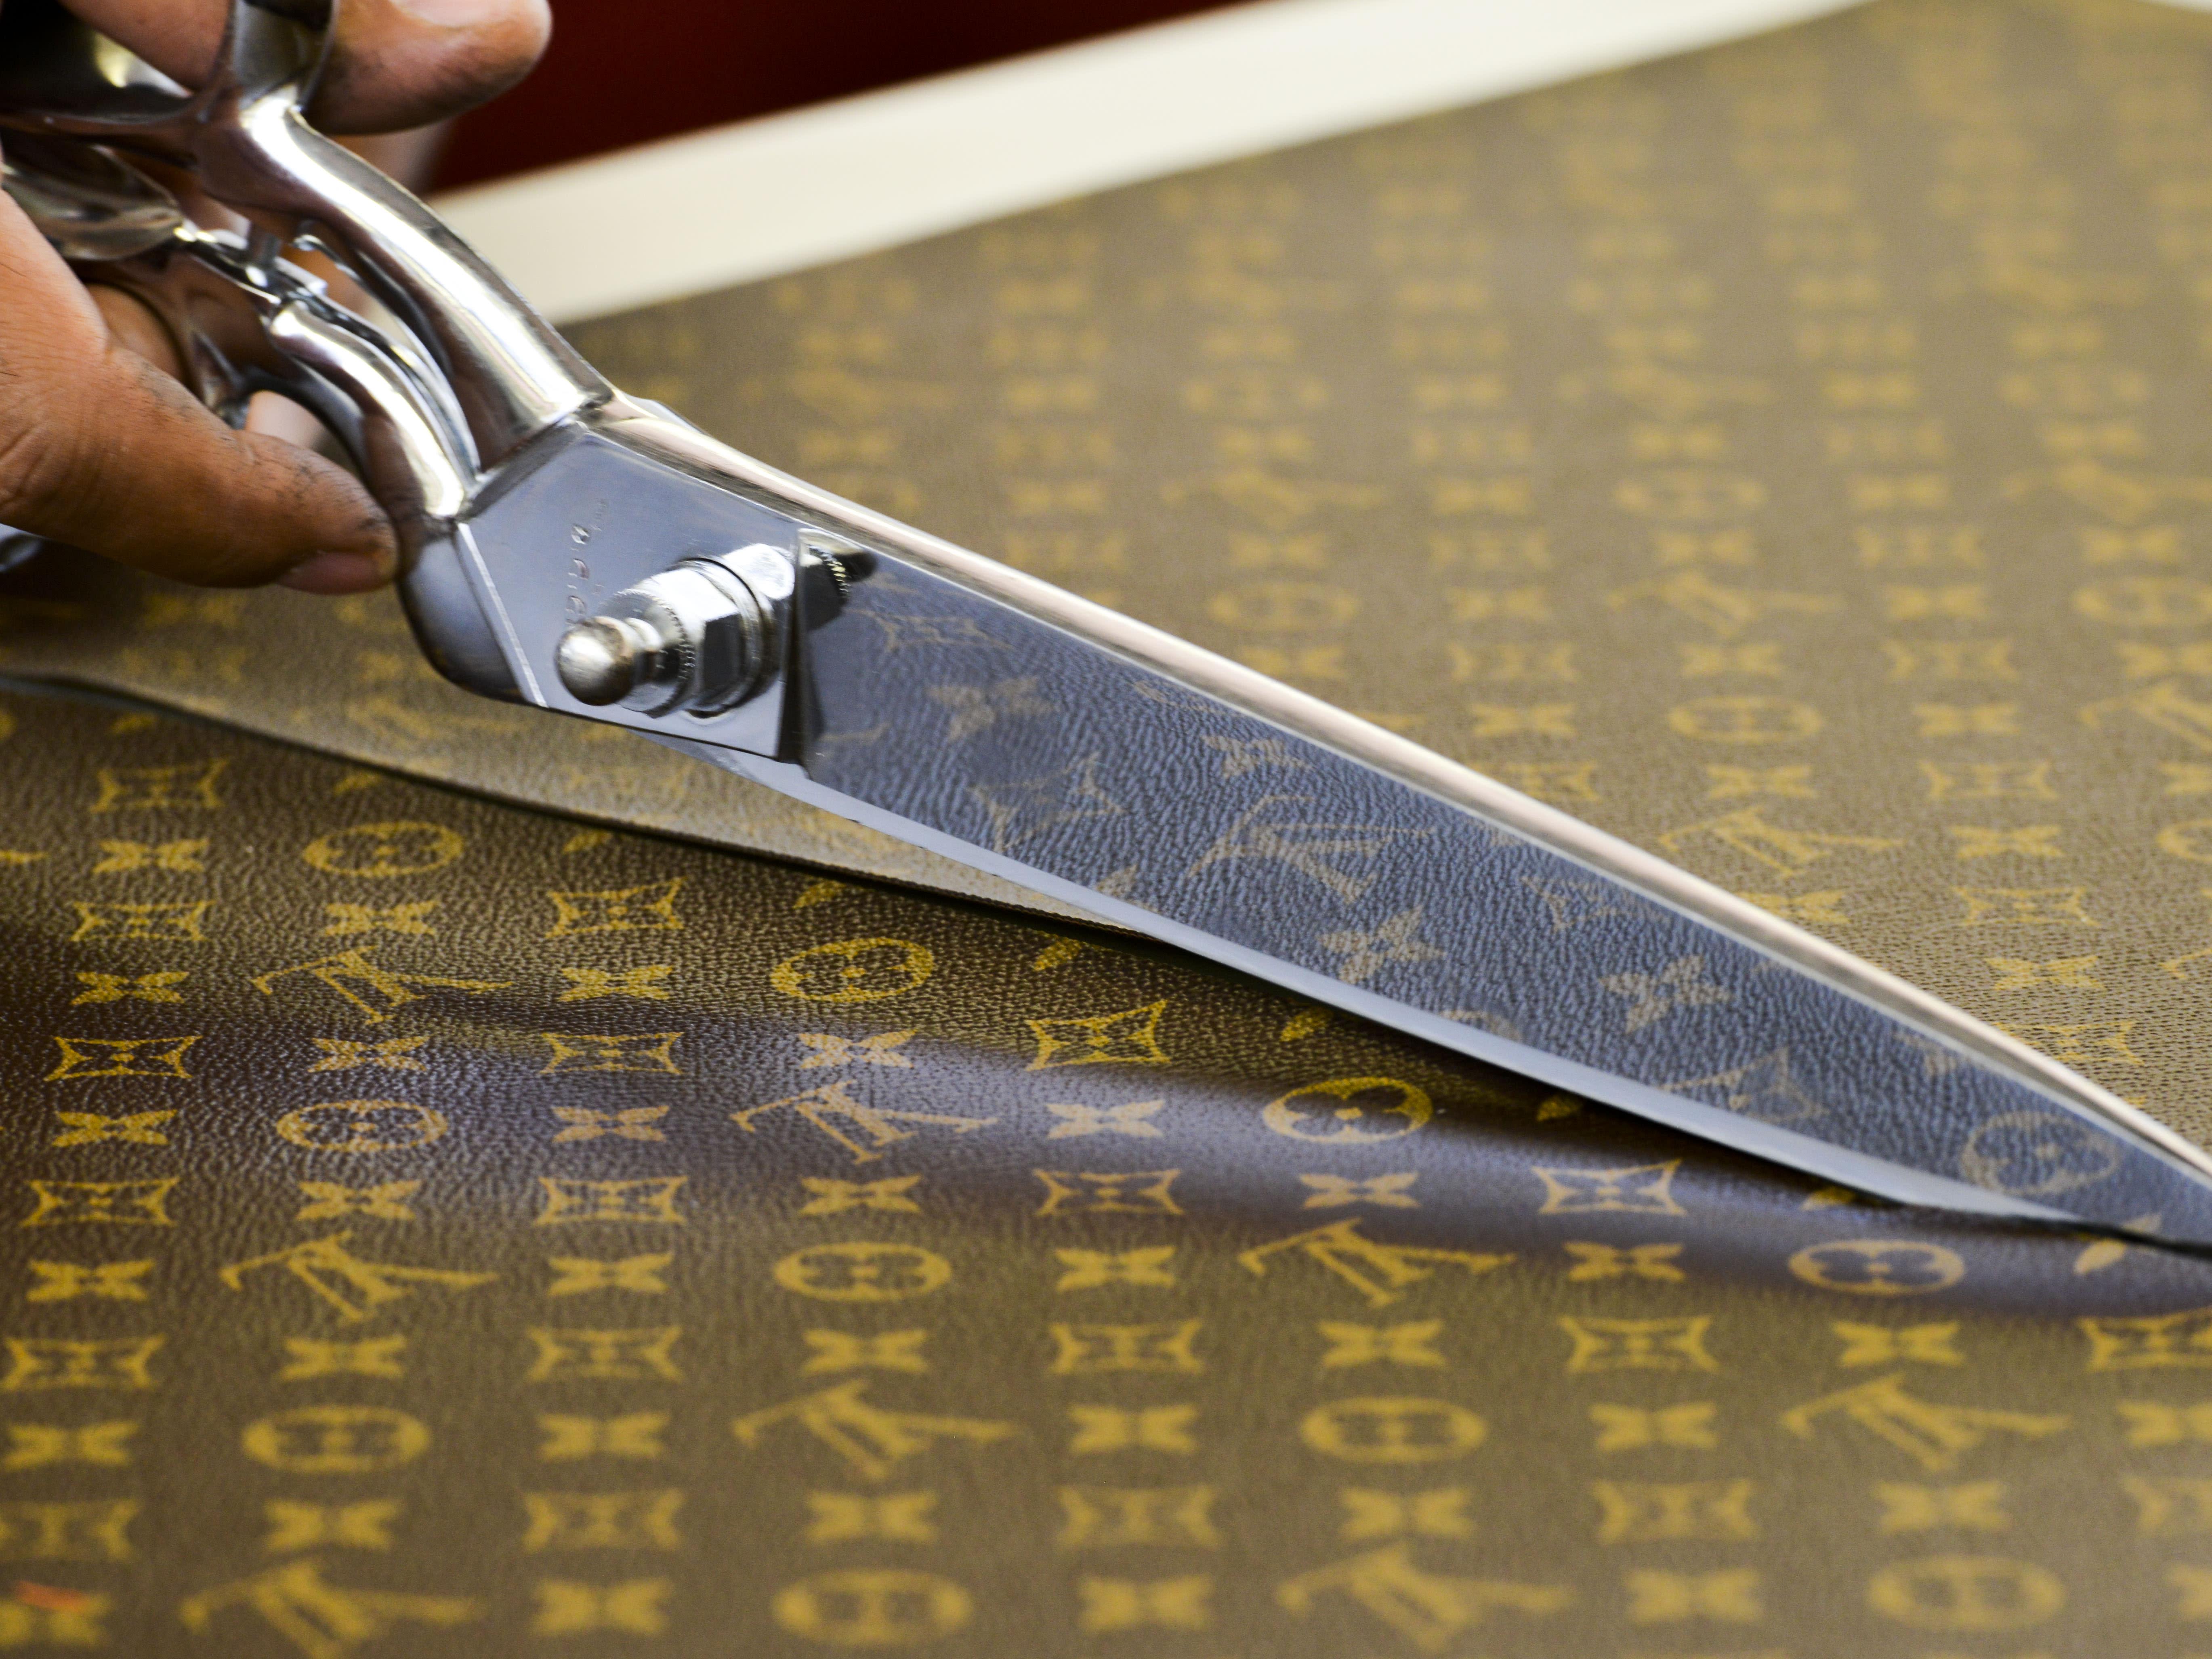 World of luxury: Exclusive look inside the Louis Vuitton home and workshops  - CultureMap Houston